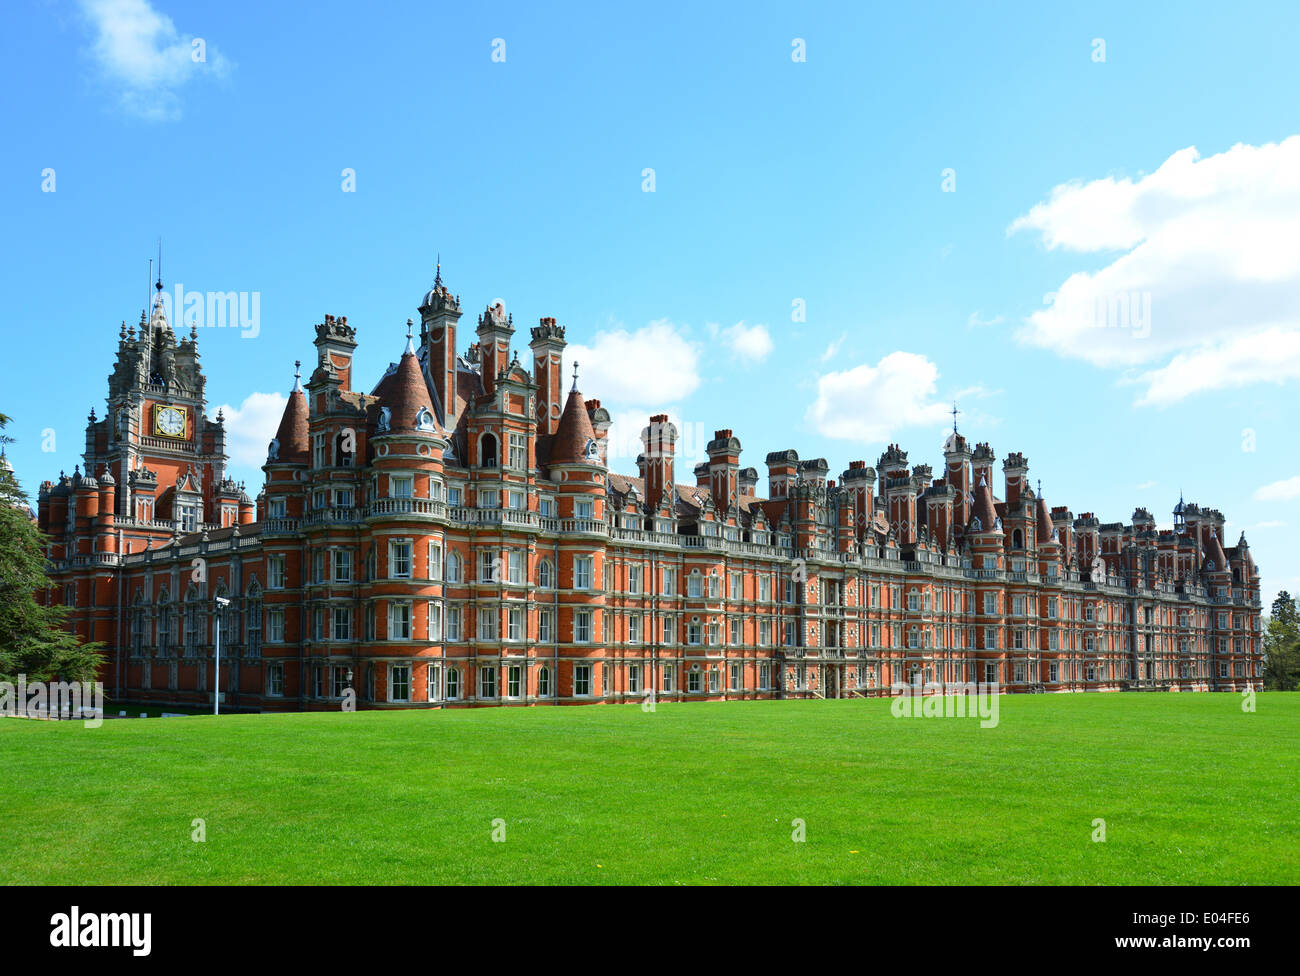 The Founder's Building, Royal Holloway, University of London, Egham ... - The FounDers BuilDing Royal Holloway University Of LonDon Egham Hill E04FE6